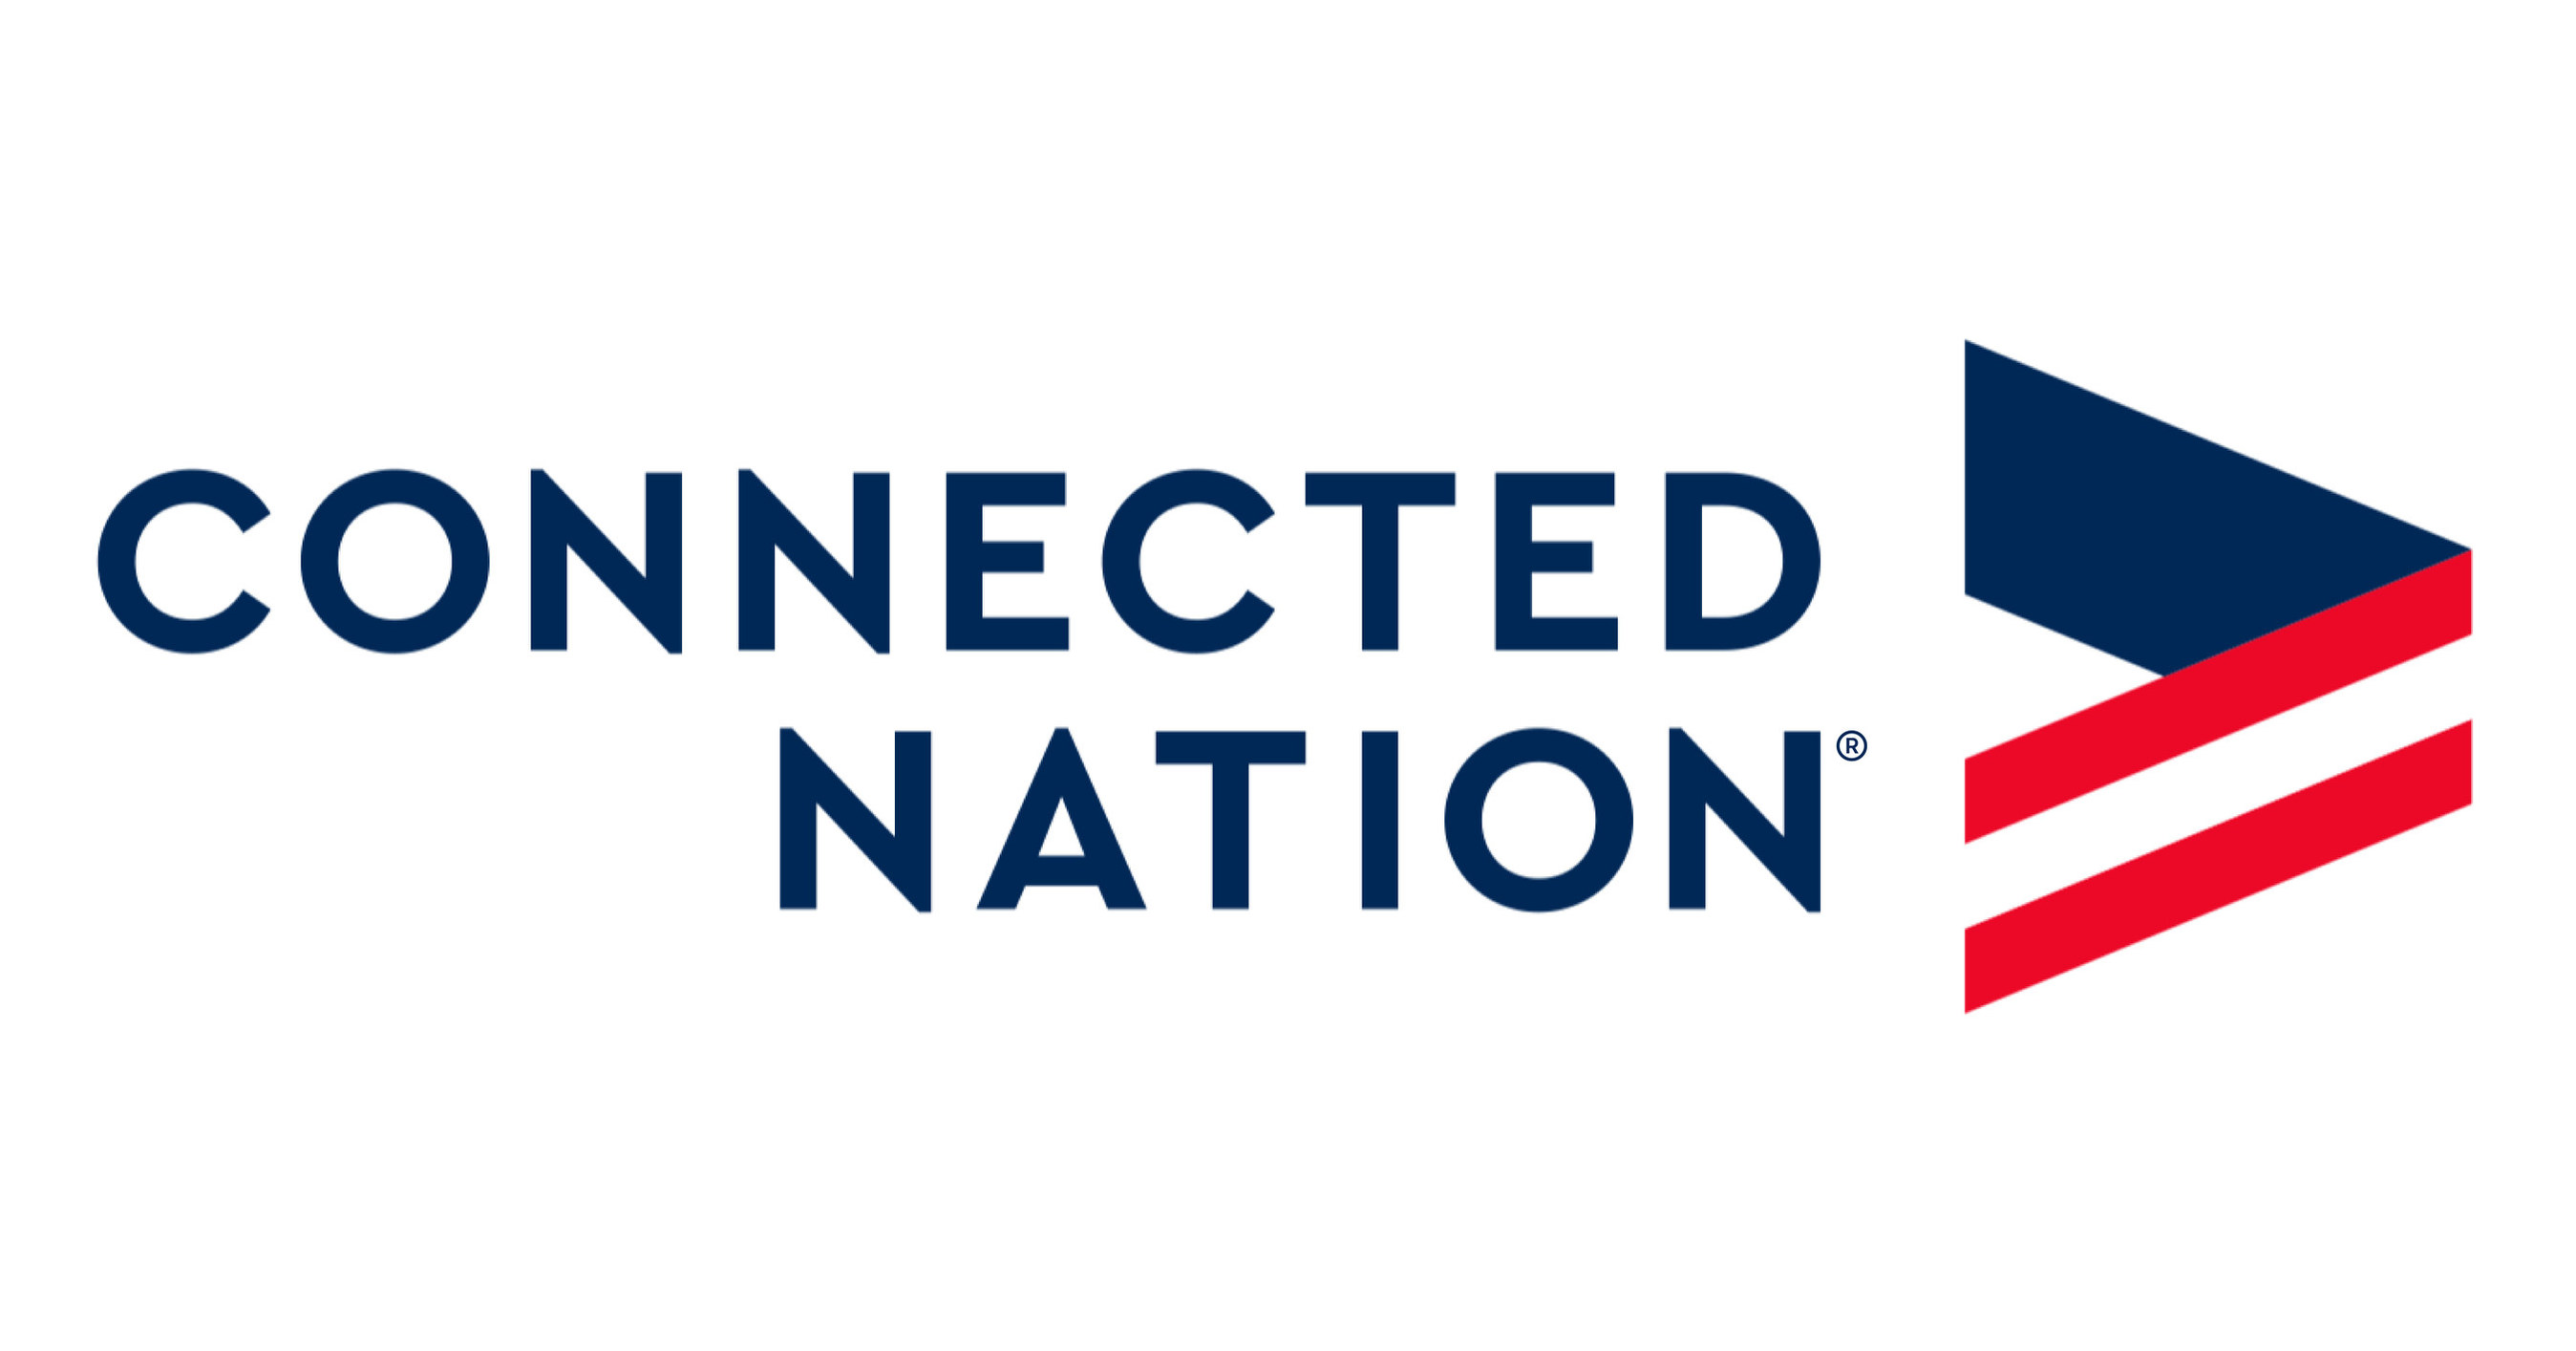 Connected Nation applauds the President’s commitment to bring high-speed internet to every American